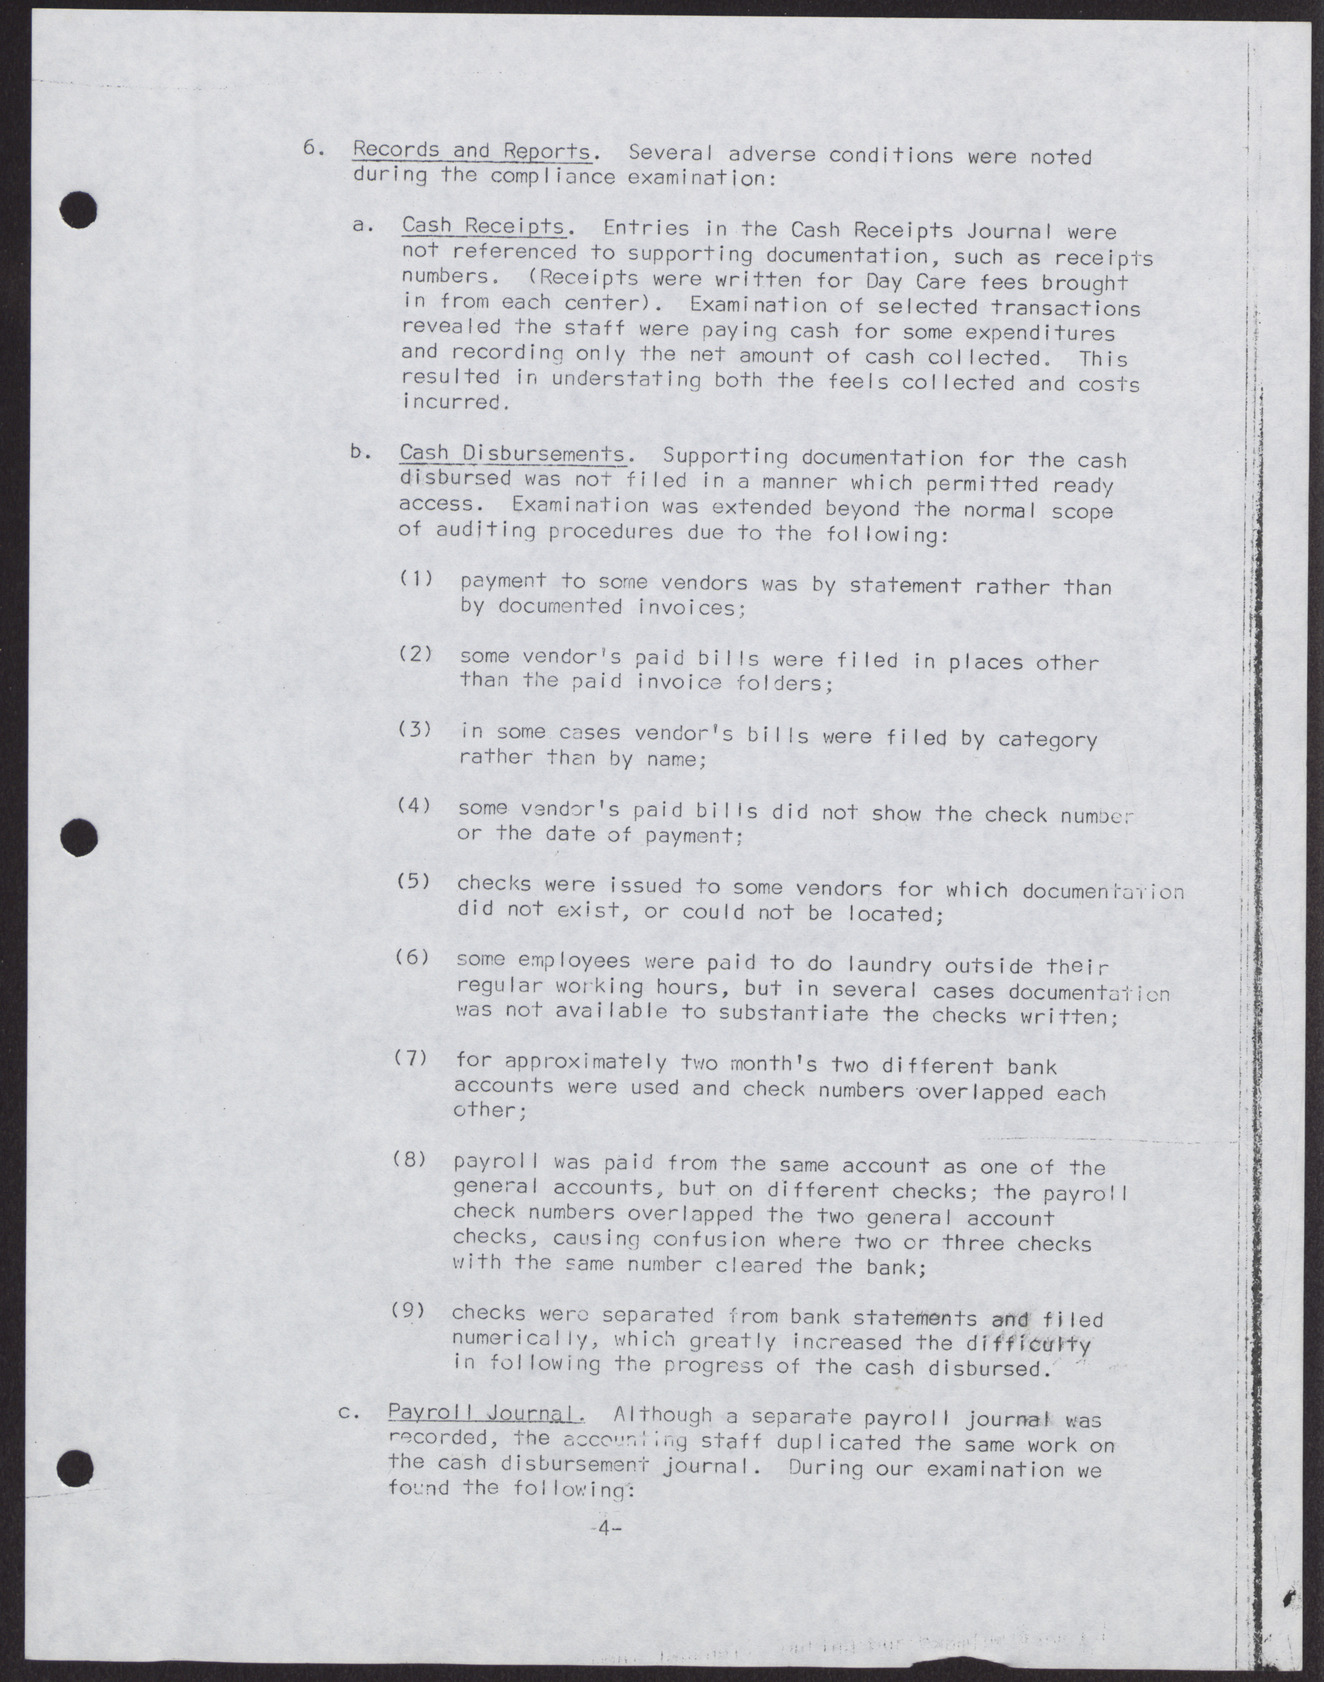 Operation Independence, Inc. Summary of Results of Financial and Compliance Examination; Current General Fund; Funds Received and Disbursed; Budgeted, Uncured, and Questioned Costs (10 pages), December 31, 1966, page 4